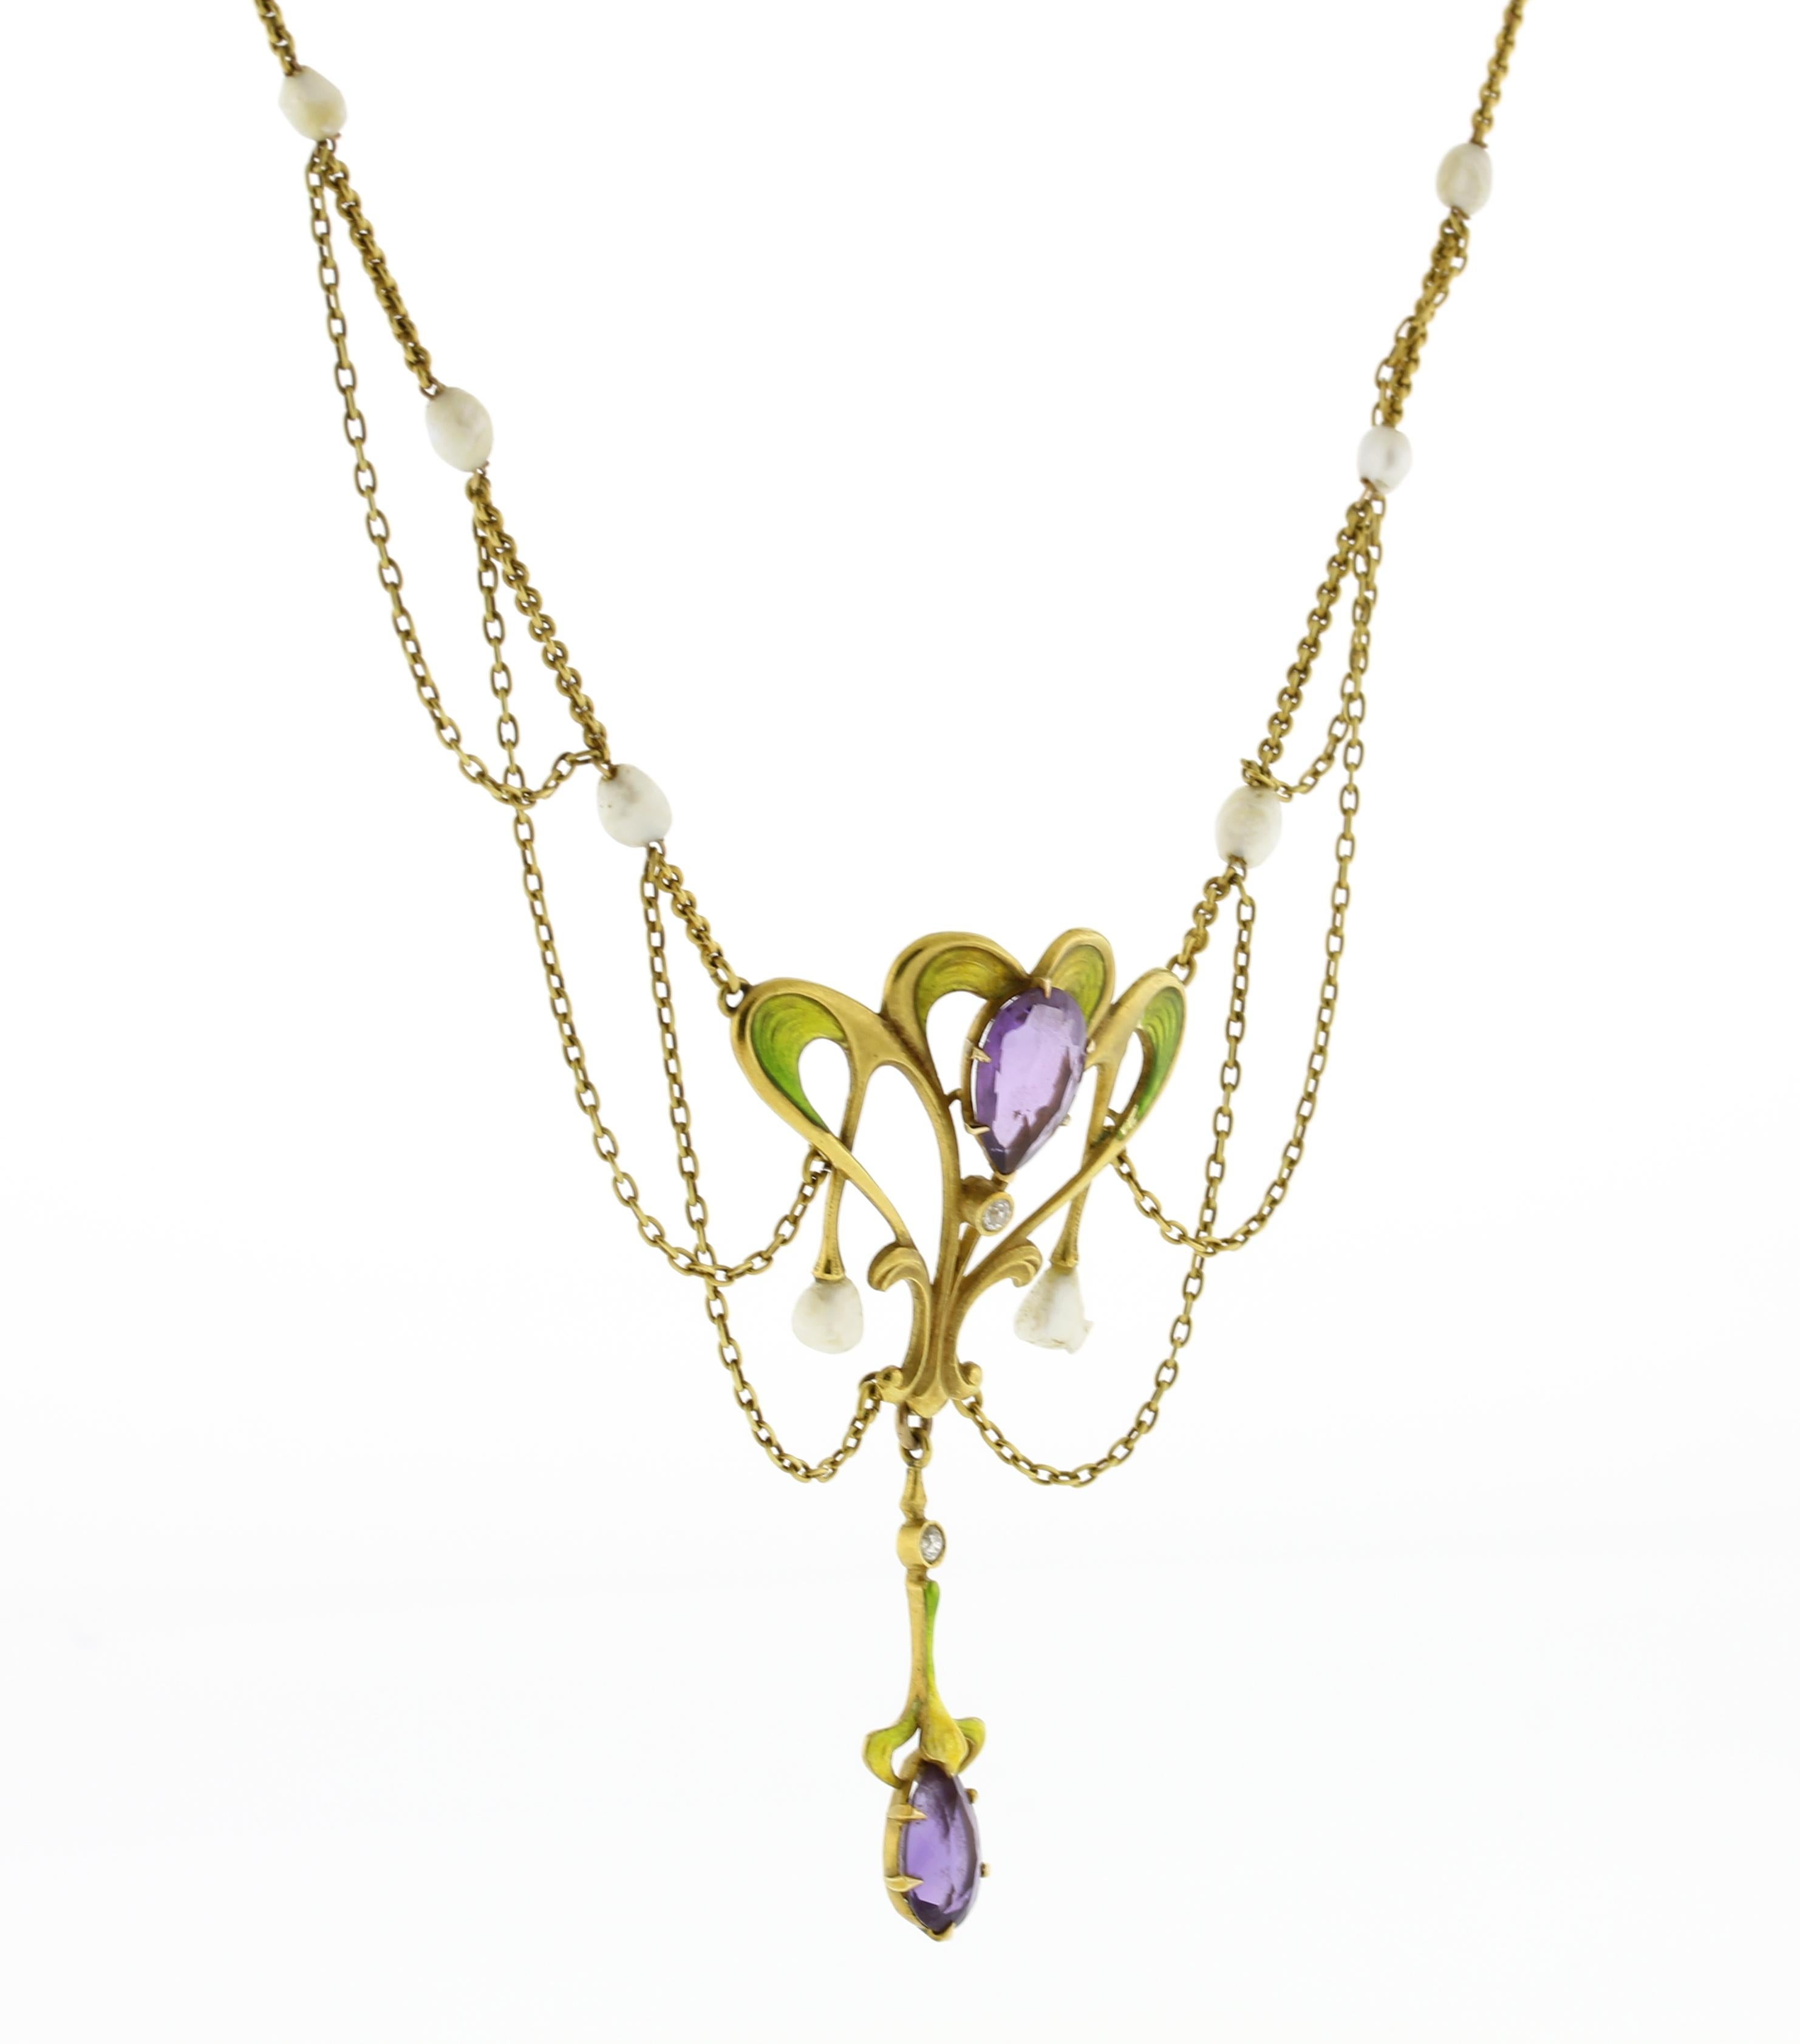 This 18kt yellow gold necklace has green enamel and gemstones.
• Metal:18kt Yellow Gold 
• Circa: 1890s
• Gemstone: 2 Diamonds, 2 Amethysts, 8 Pearls
• Weight: 10.7 grams
• Length: 16.25 inches
• Packaging: Pampillonia presentation box
• Condition: